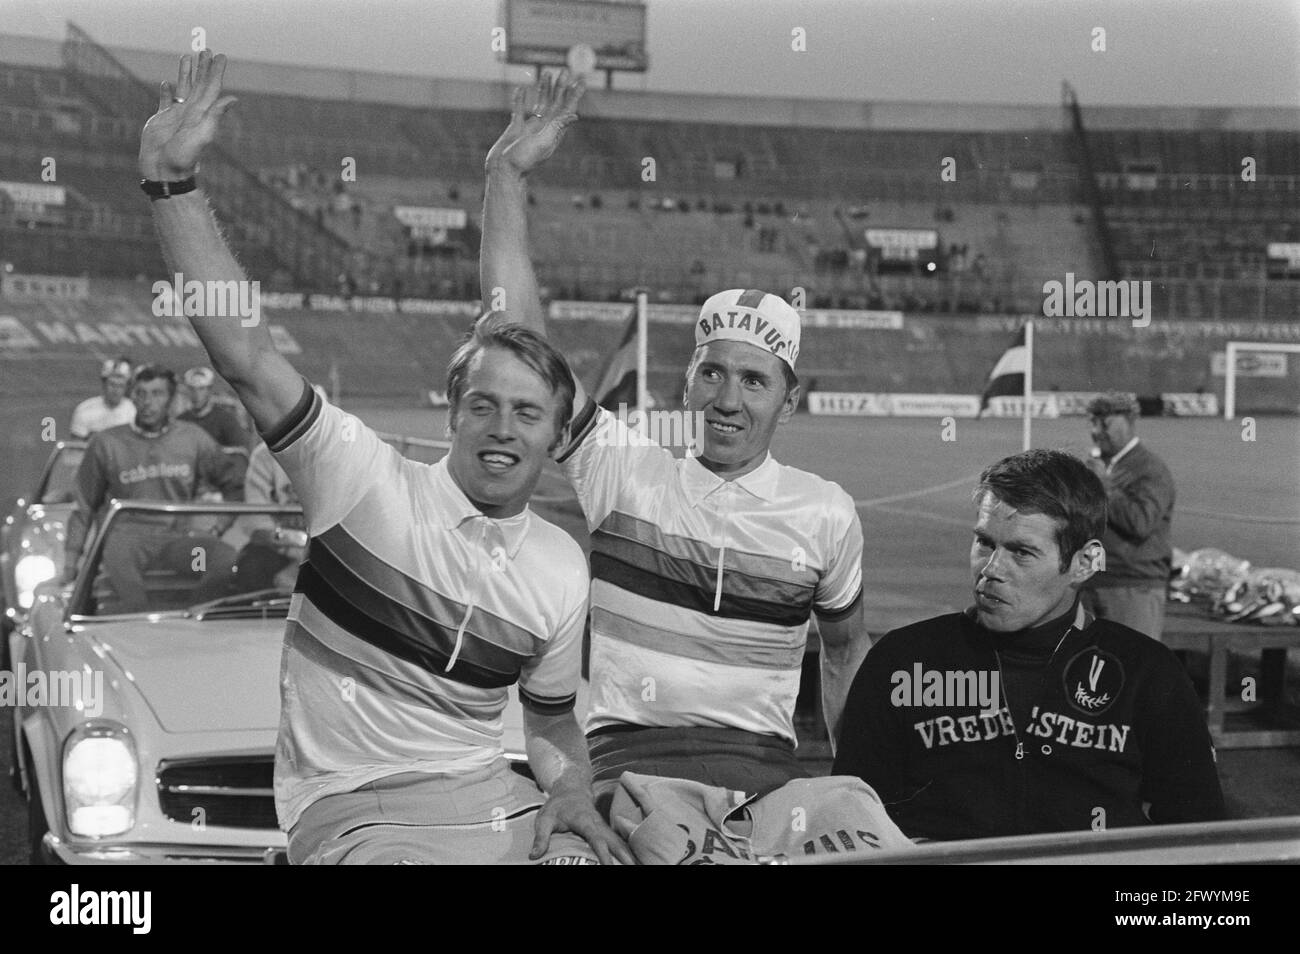 Revanches world championships cycling in Olympic Stadium Amsterdam; honoring Cees Stam, Rudolph (Germany), pacer Walraven, August 20, 1970, honoring, sports, stayers, cycling, The Netherlands, 20th century press agency photo, news to remember, documentary, historic photography 1945-1990, visual stories, human history of the Twentieth Century, capturing moments in time Stock Photo